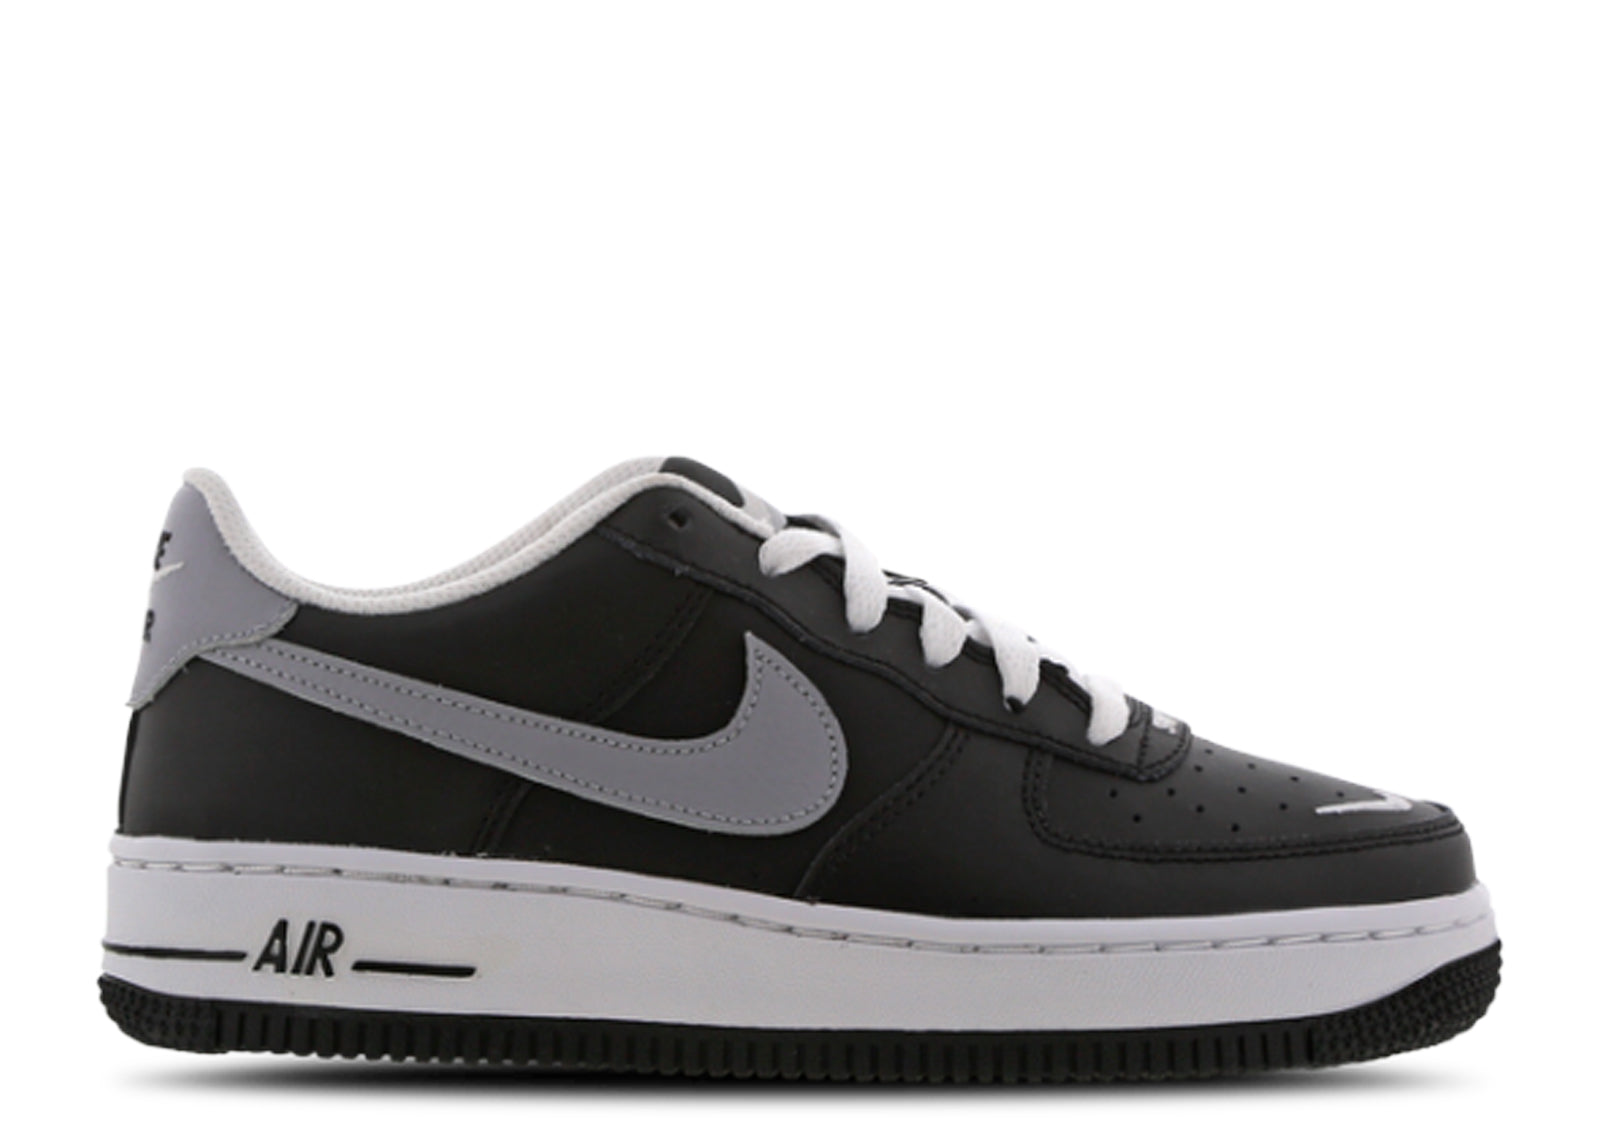 Second Chance - free Nike Air Force 1 Black Sport GS - 37,5 | NEW